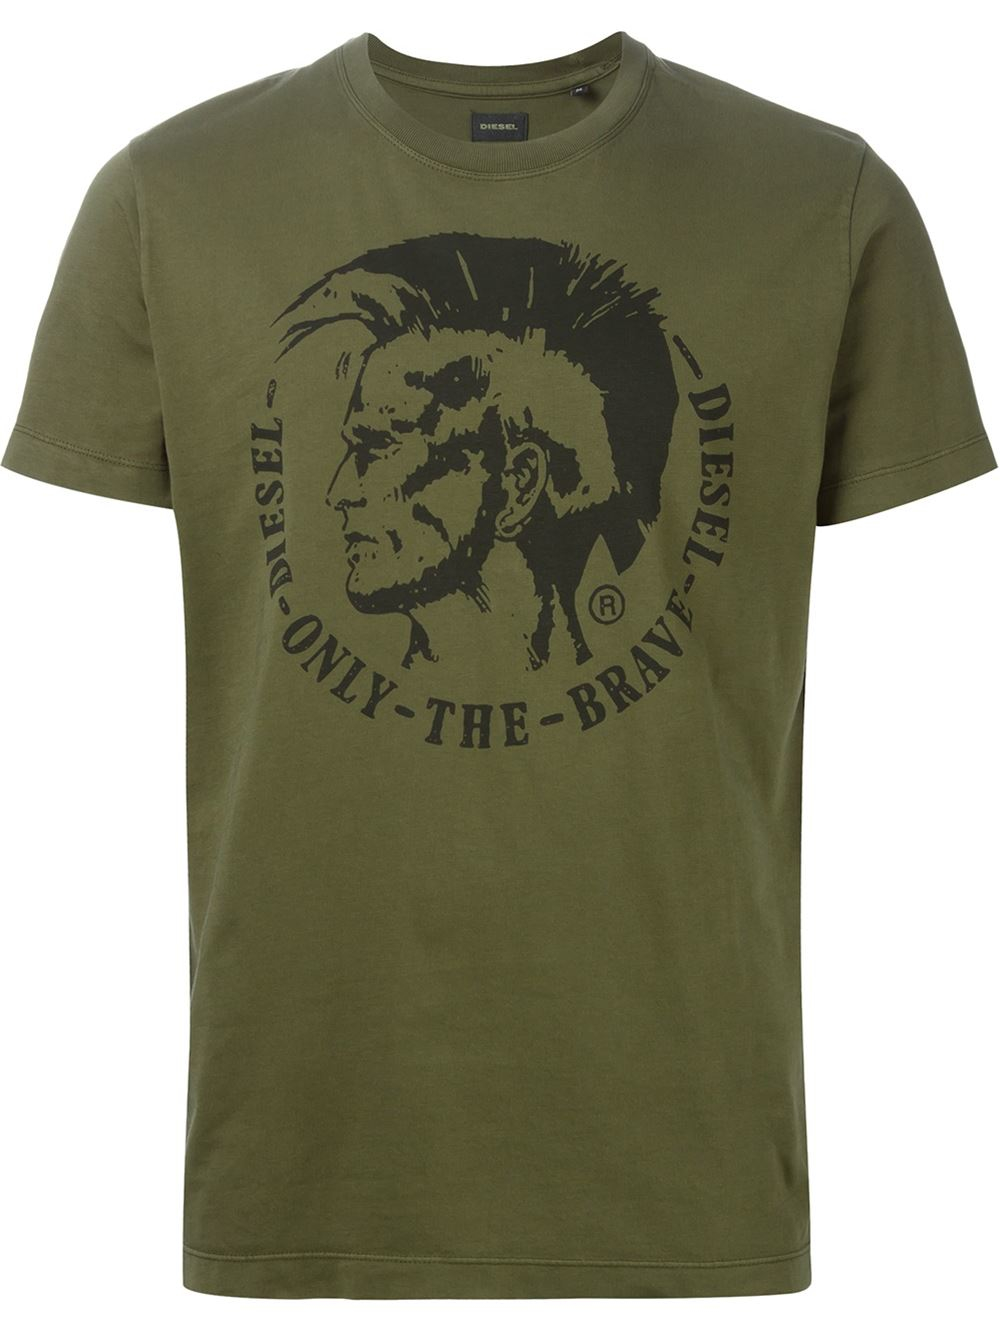 DIESEL Cotton Only The Brave T-shirt in Green for Men - Lyst